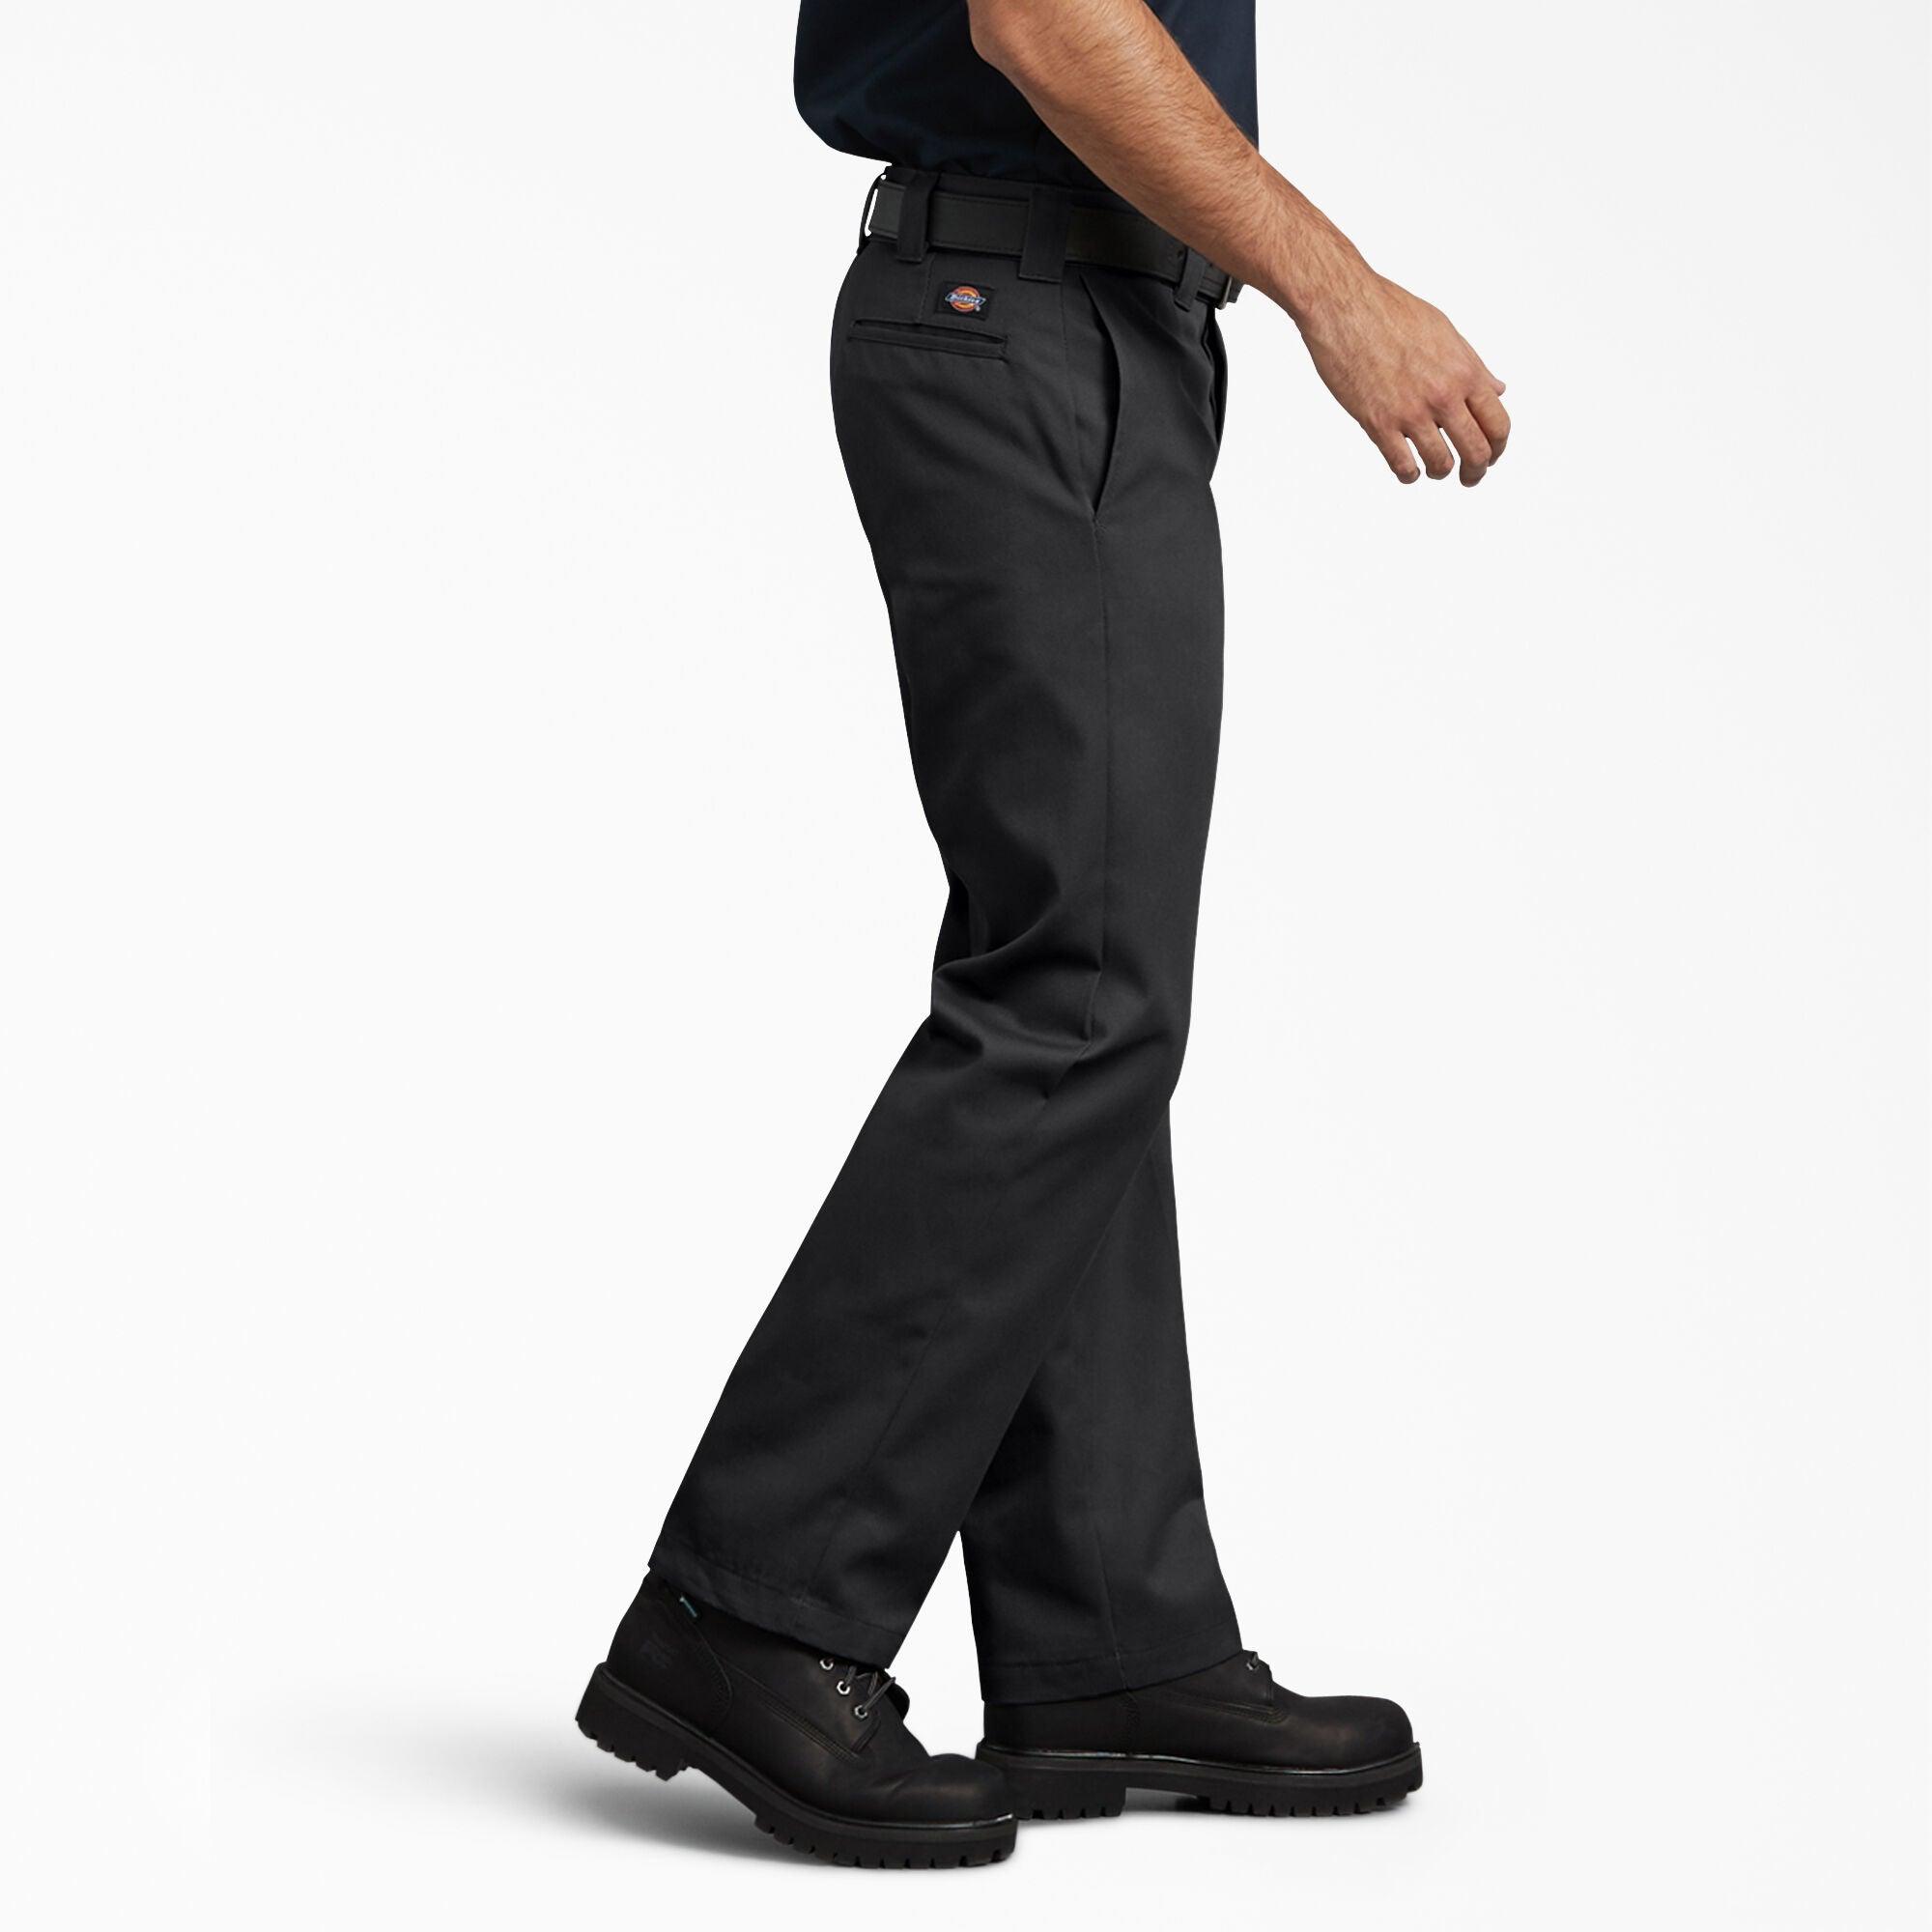 Slim Fit Work Pants, Black - Purpose-Built / Home of the Trades